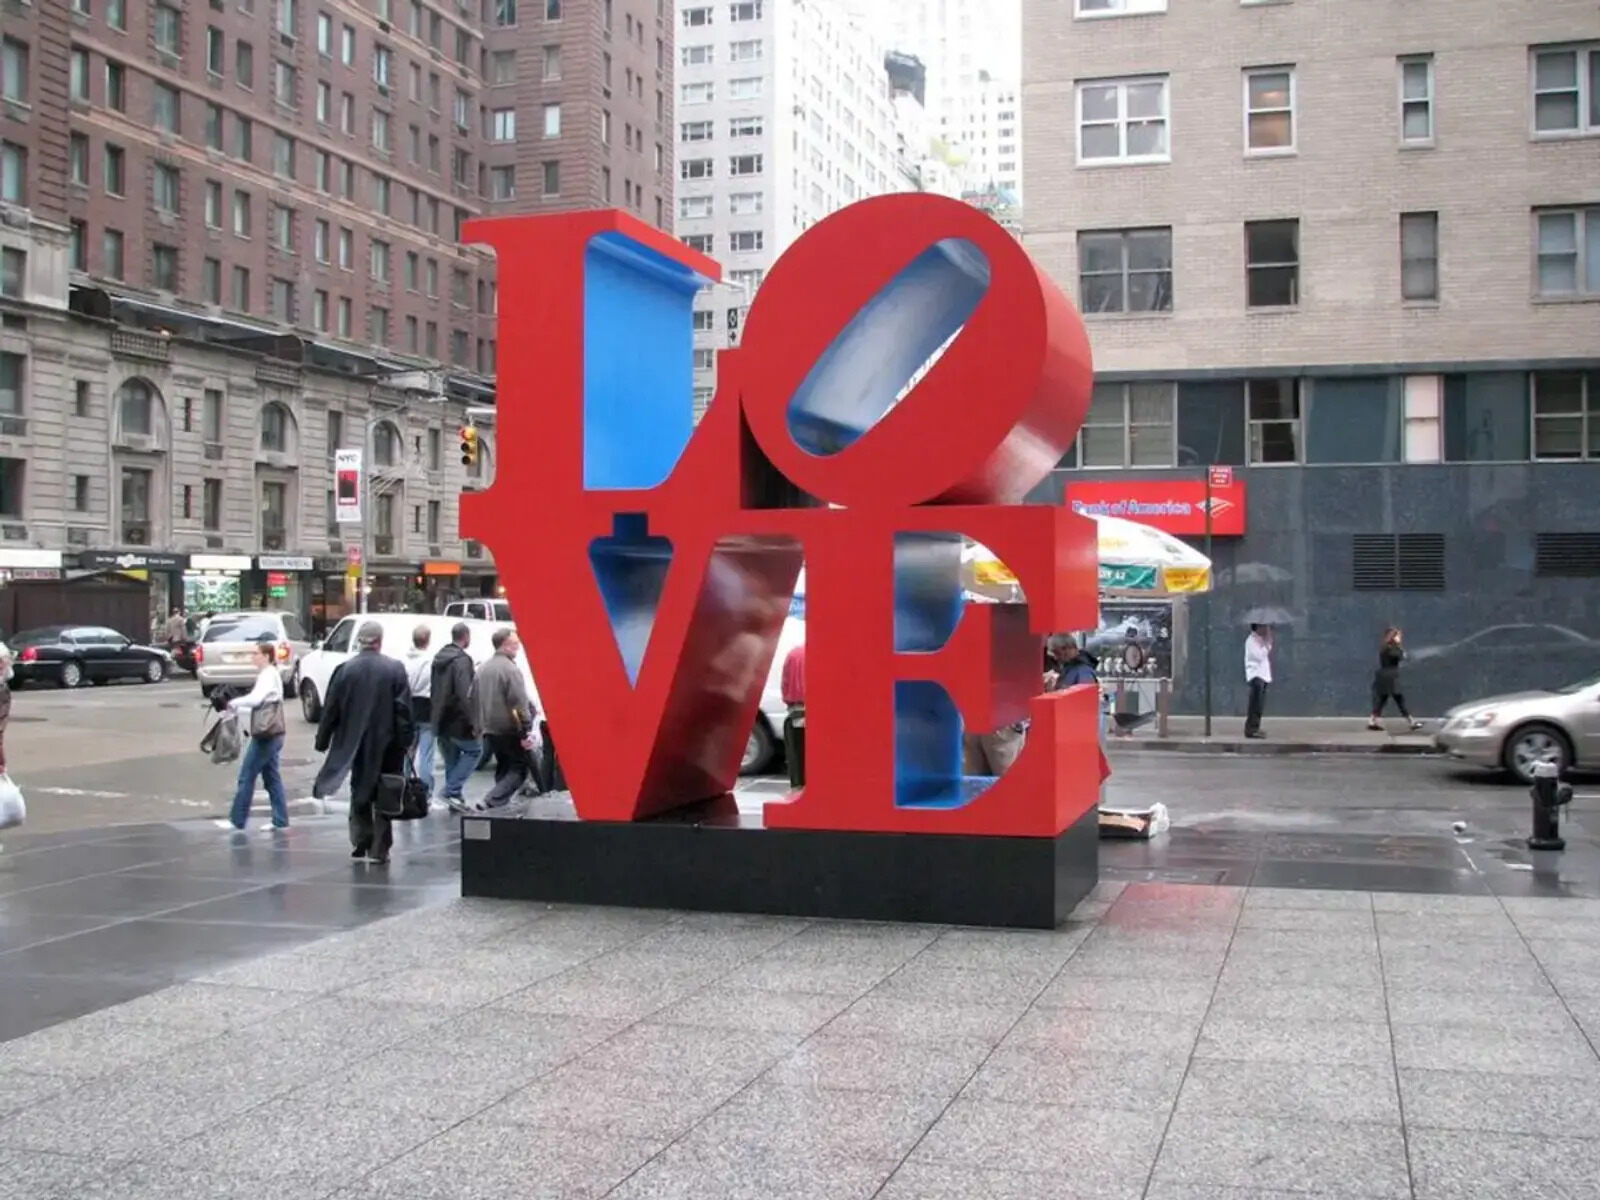 Who Made The Love Sculpture